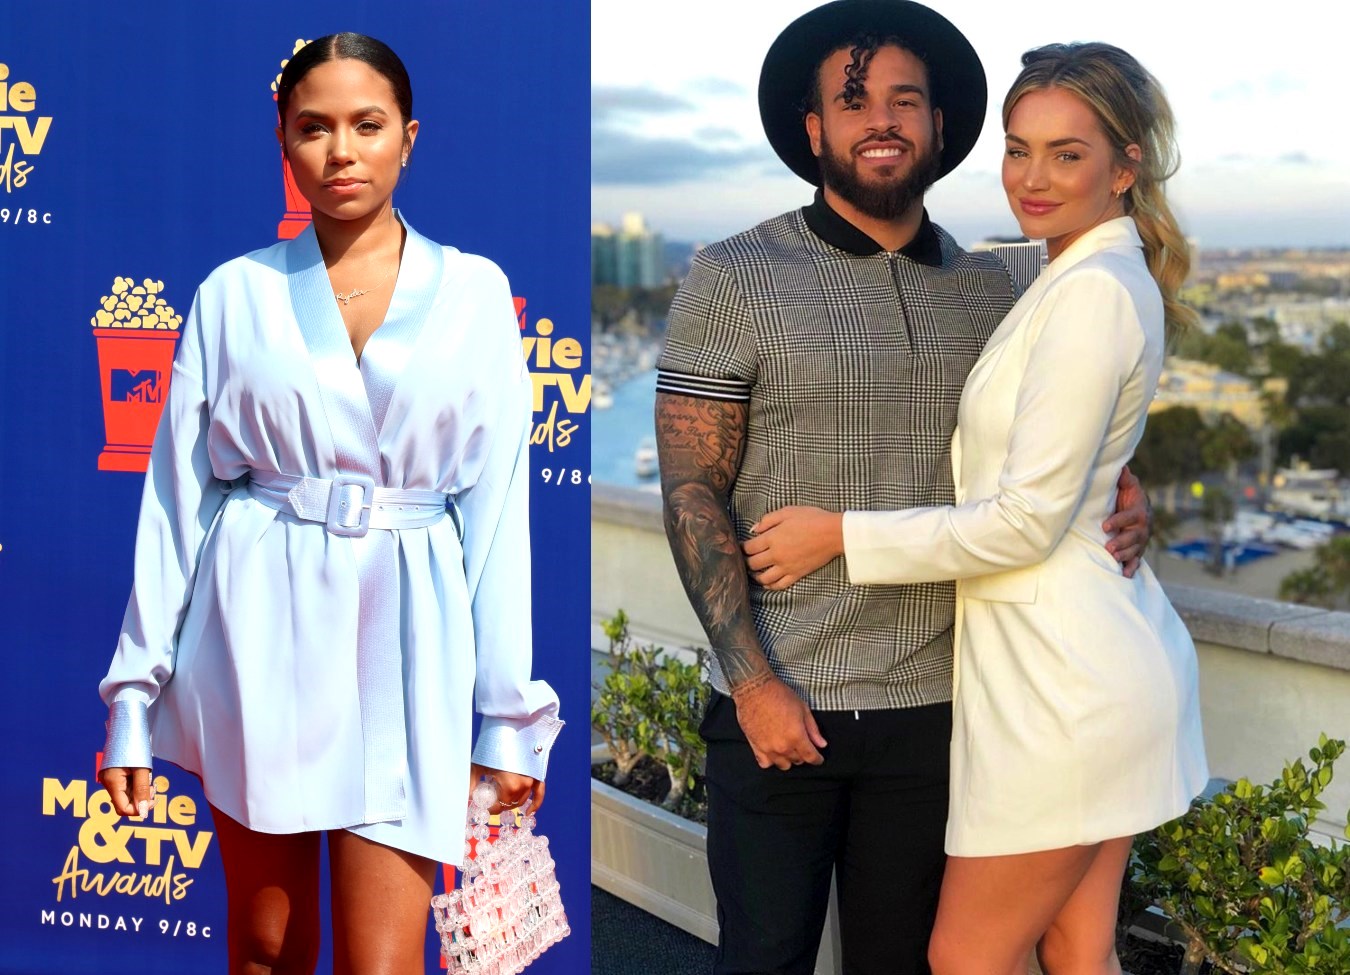 Teen Mom OG's Cheyenne Floyd Reacts to Ex Cory Wharton Expecting His 2nd Child With Girlfriend Taylor Selfridge, How Did Cheyenne Find Out About Baby News?